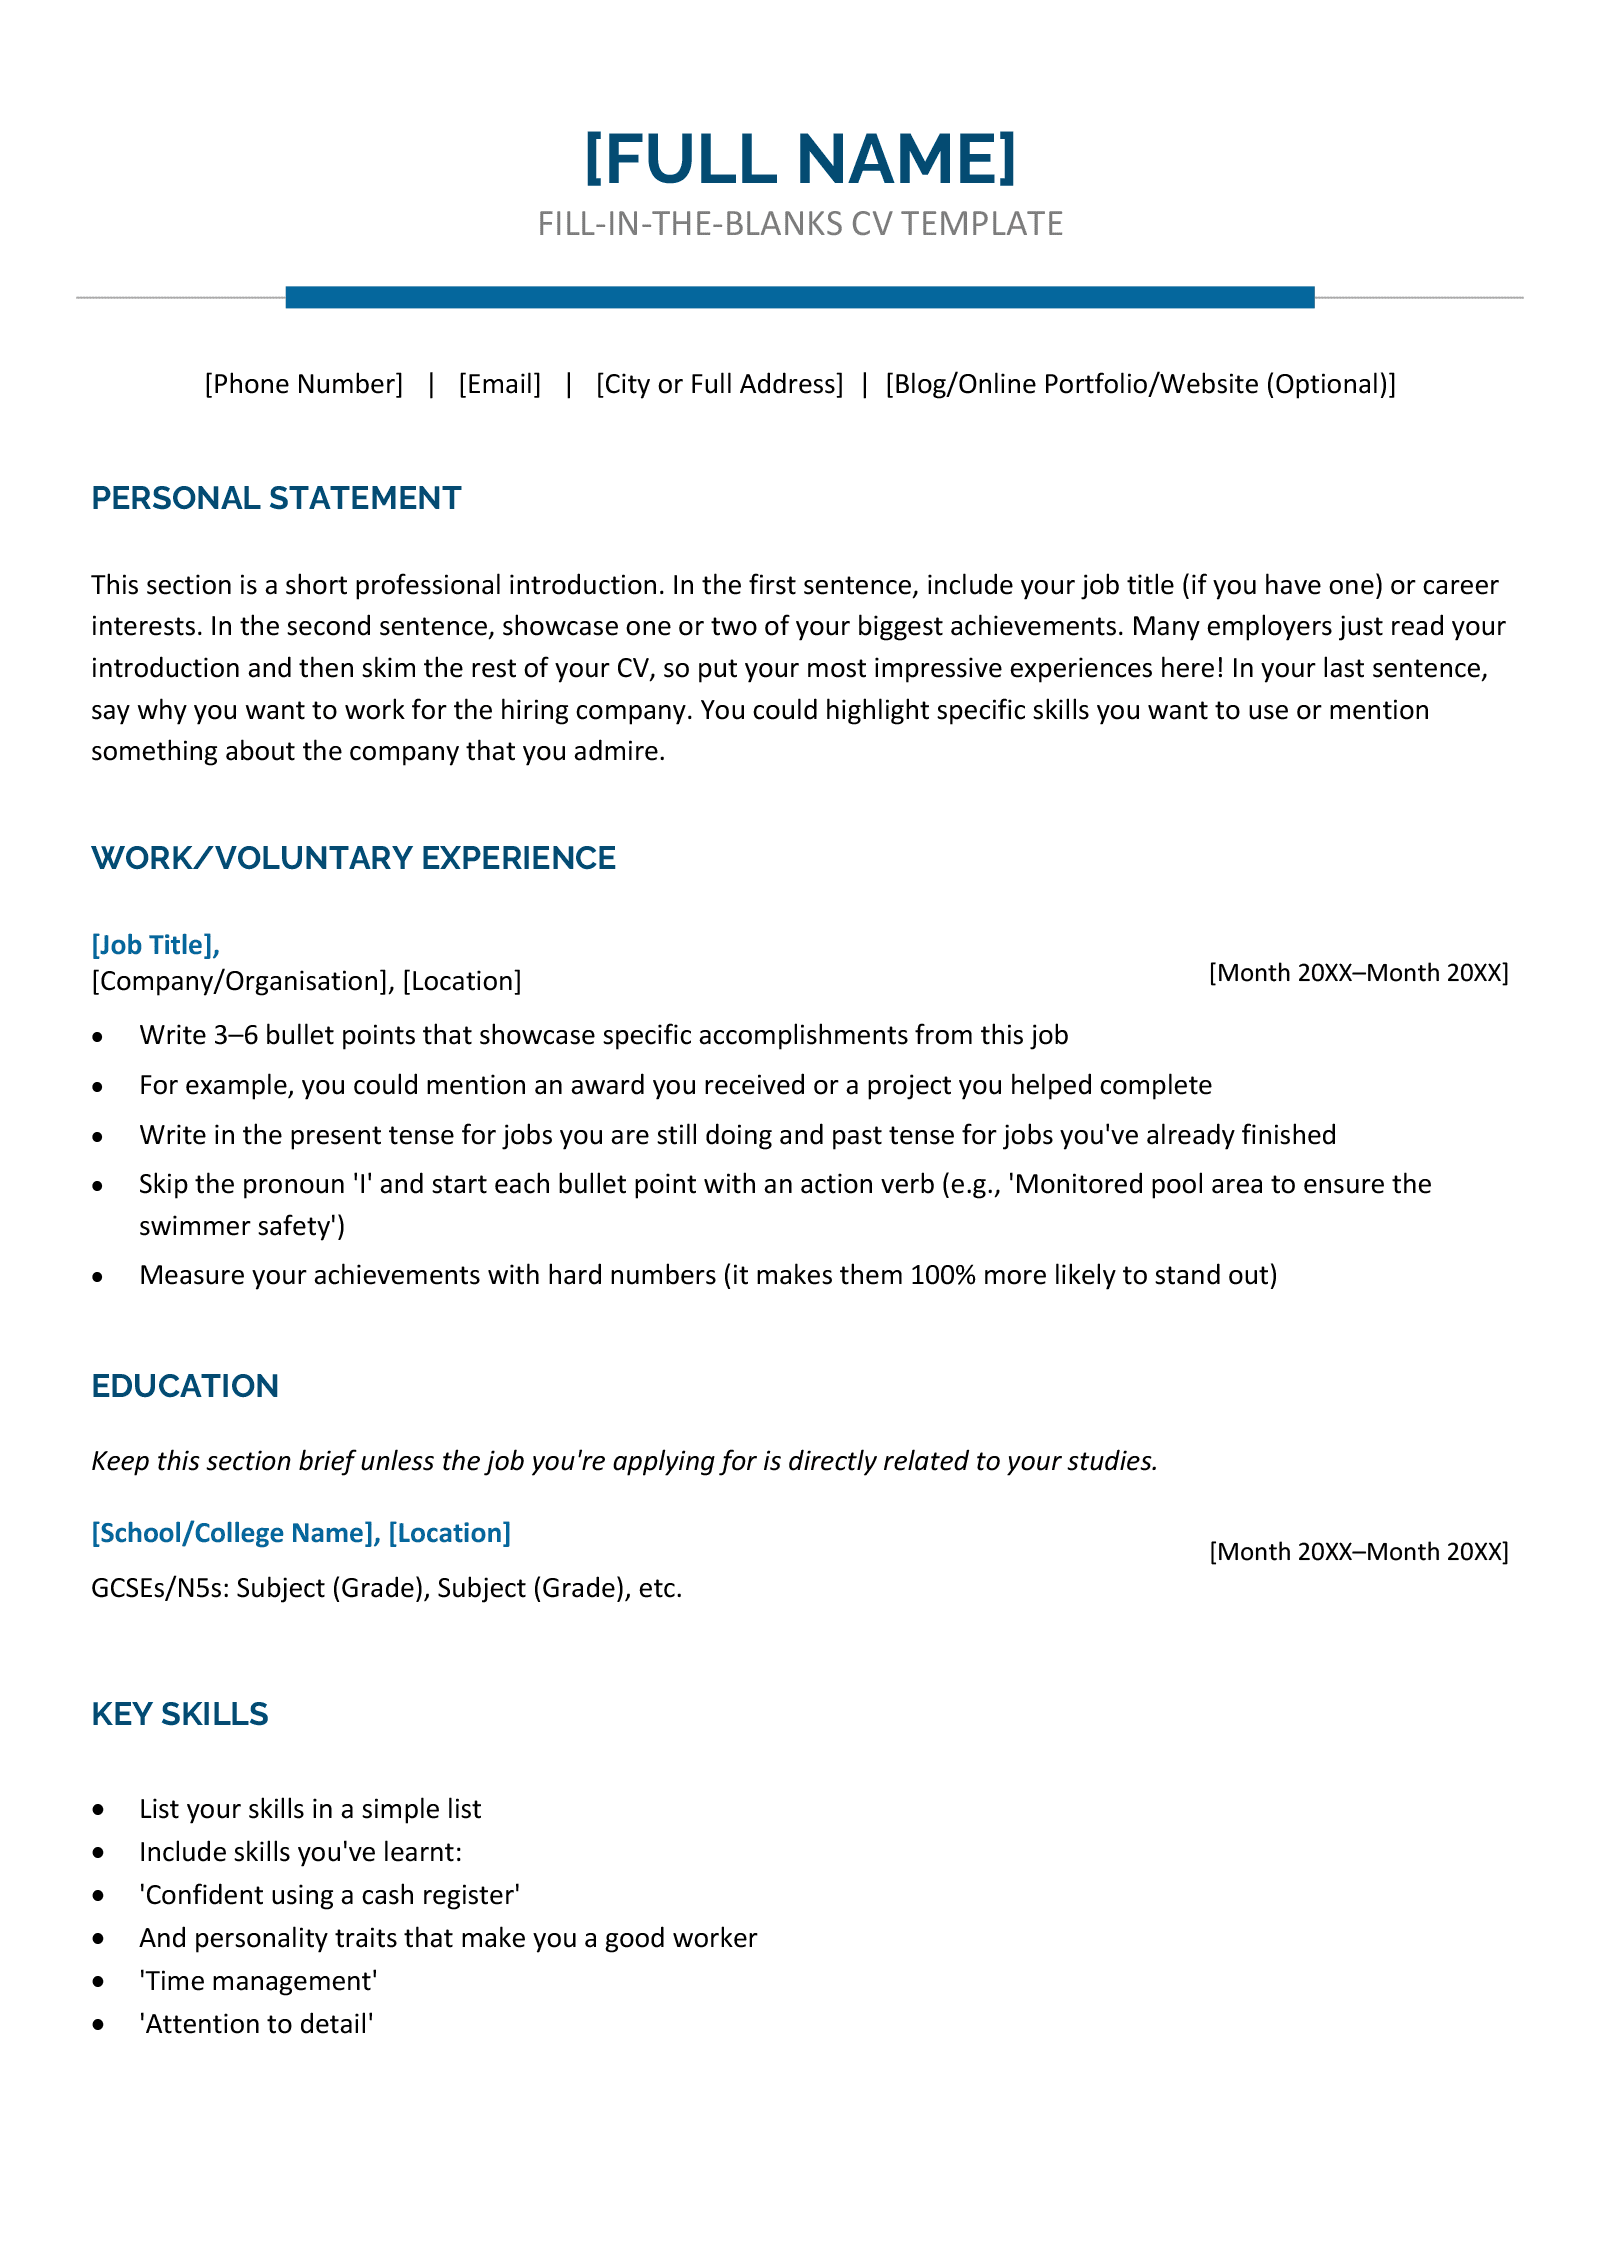 A fill-in-the-blanks CV template for a 16 year old with text explaining how to use it.